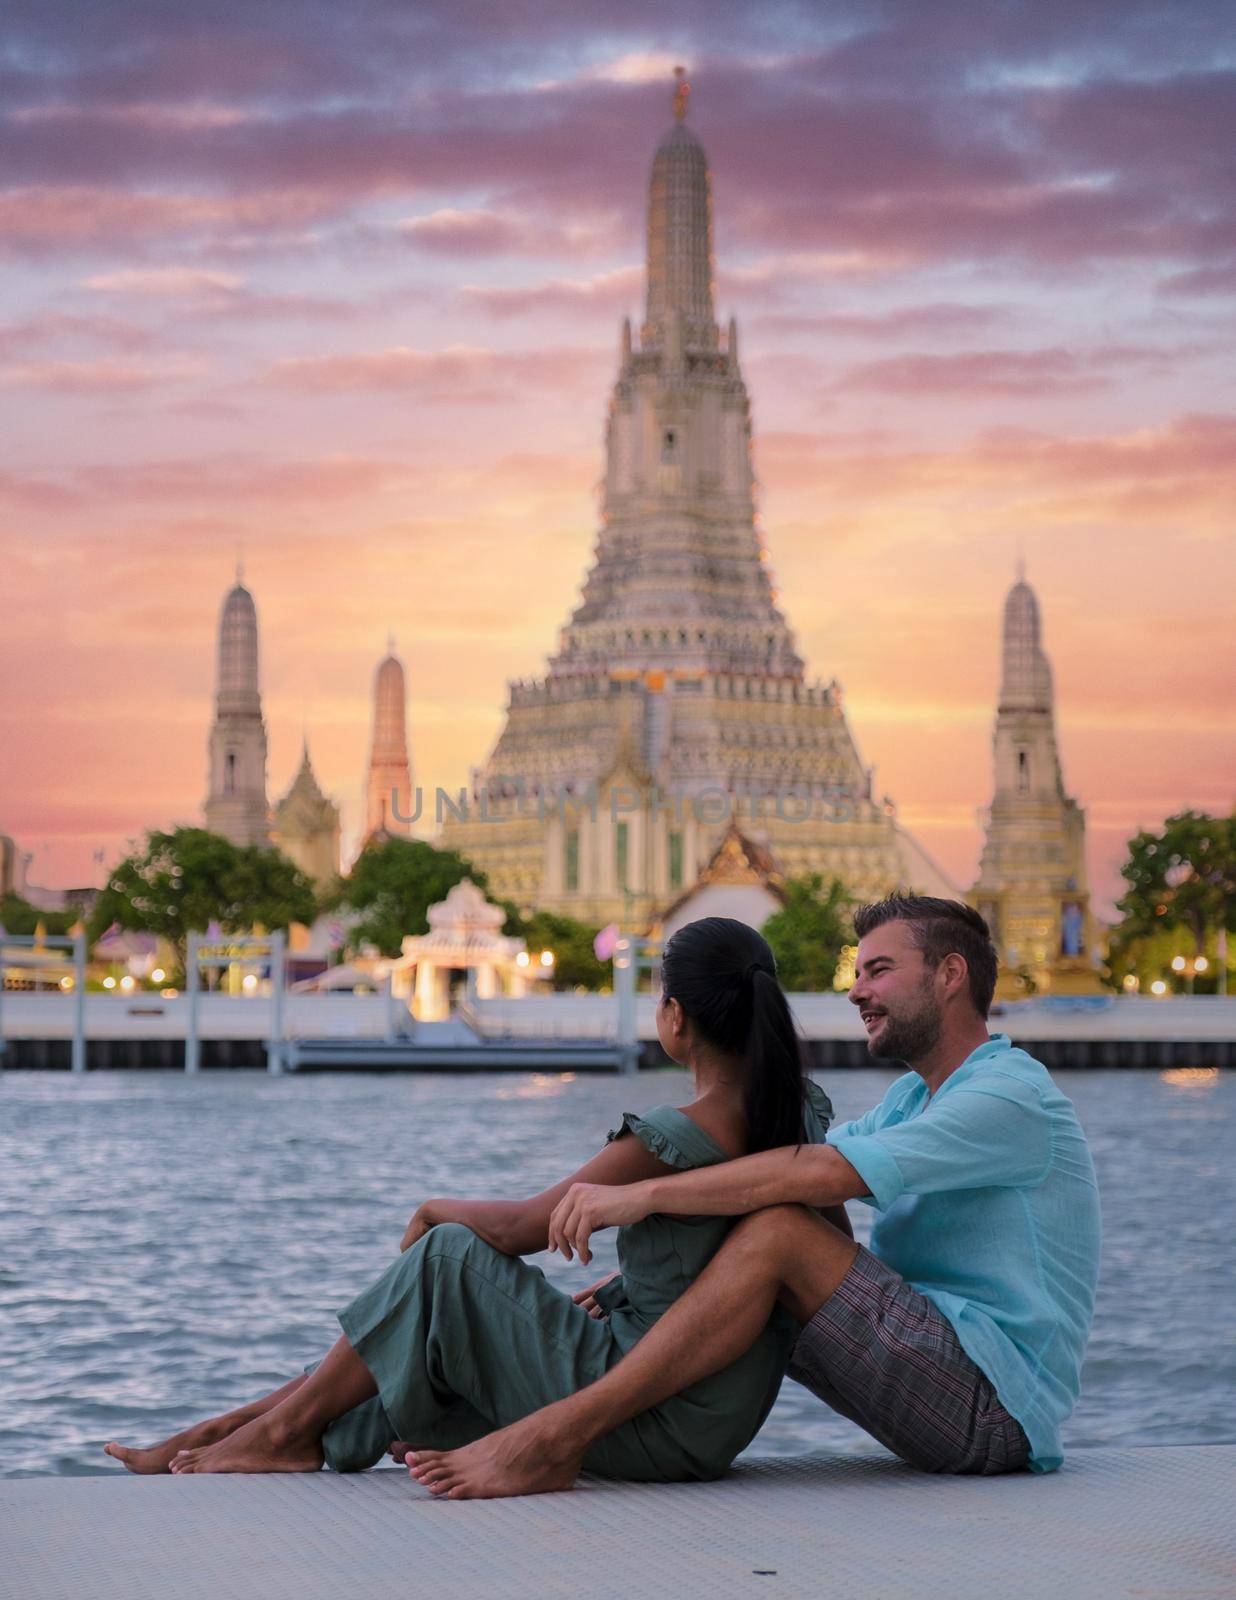 Out of focus blur couple of Asian women and European men watching the sunset at Wat Arun temple in Bangkok Thailand, Temple of Dawn, Buddhist temple alongside the Chao Phraya River.